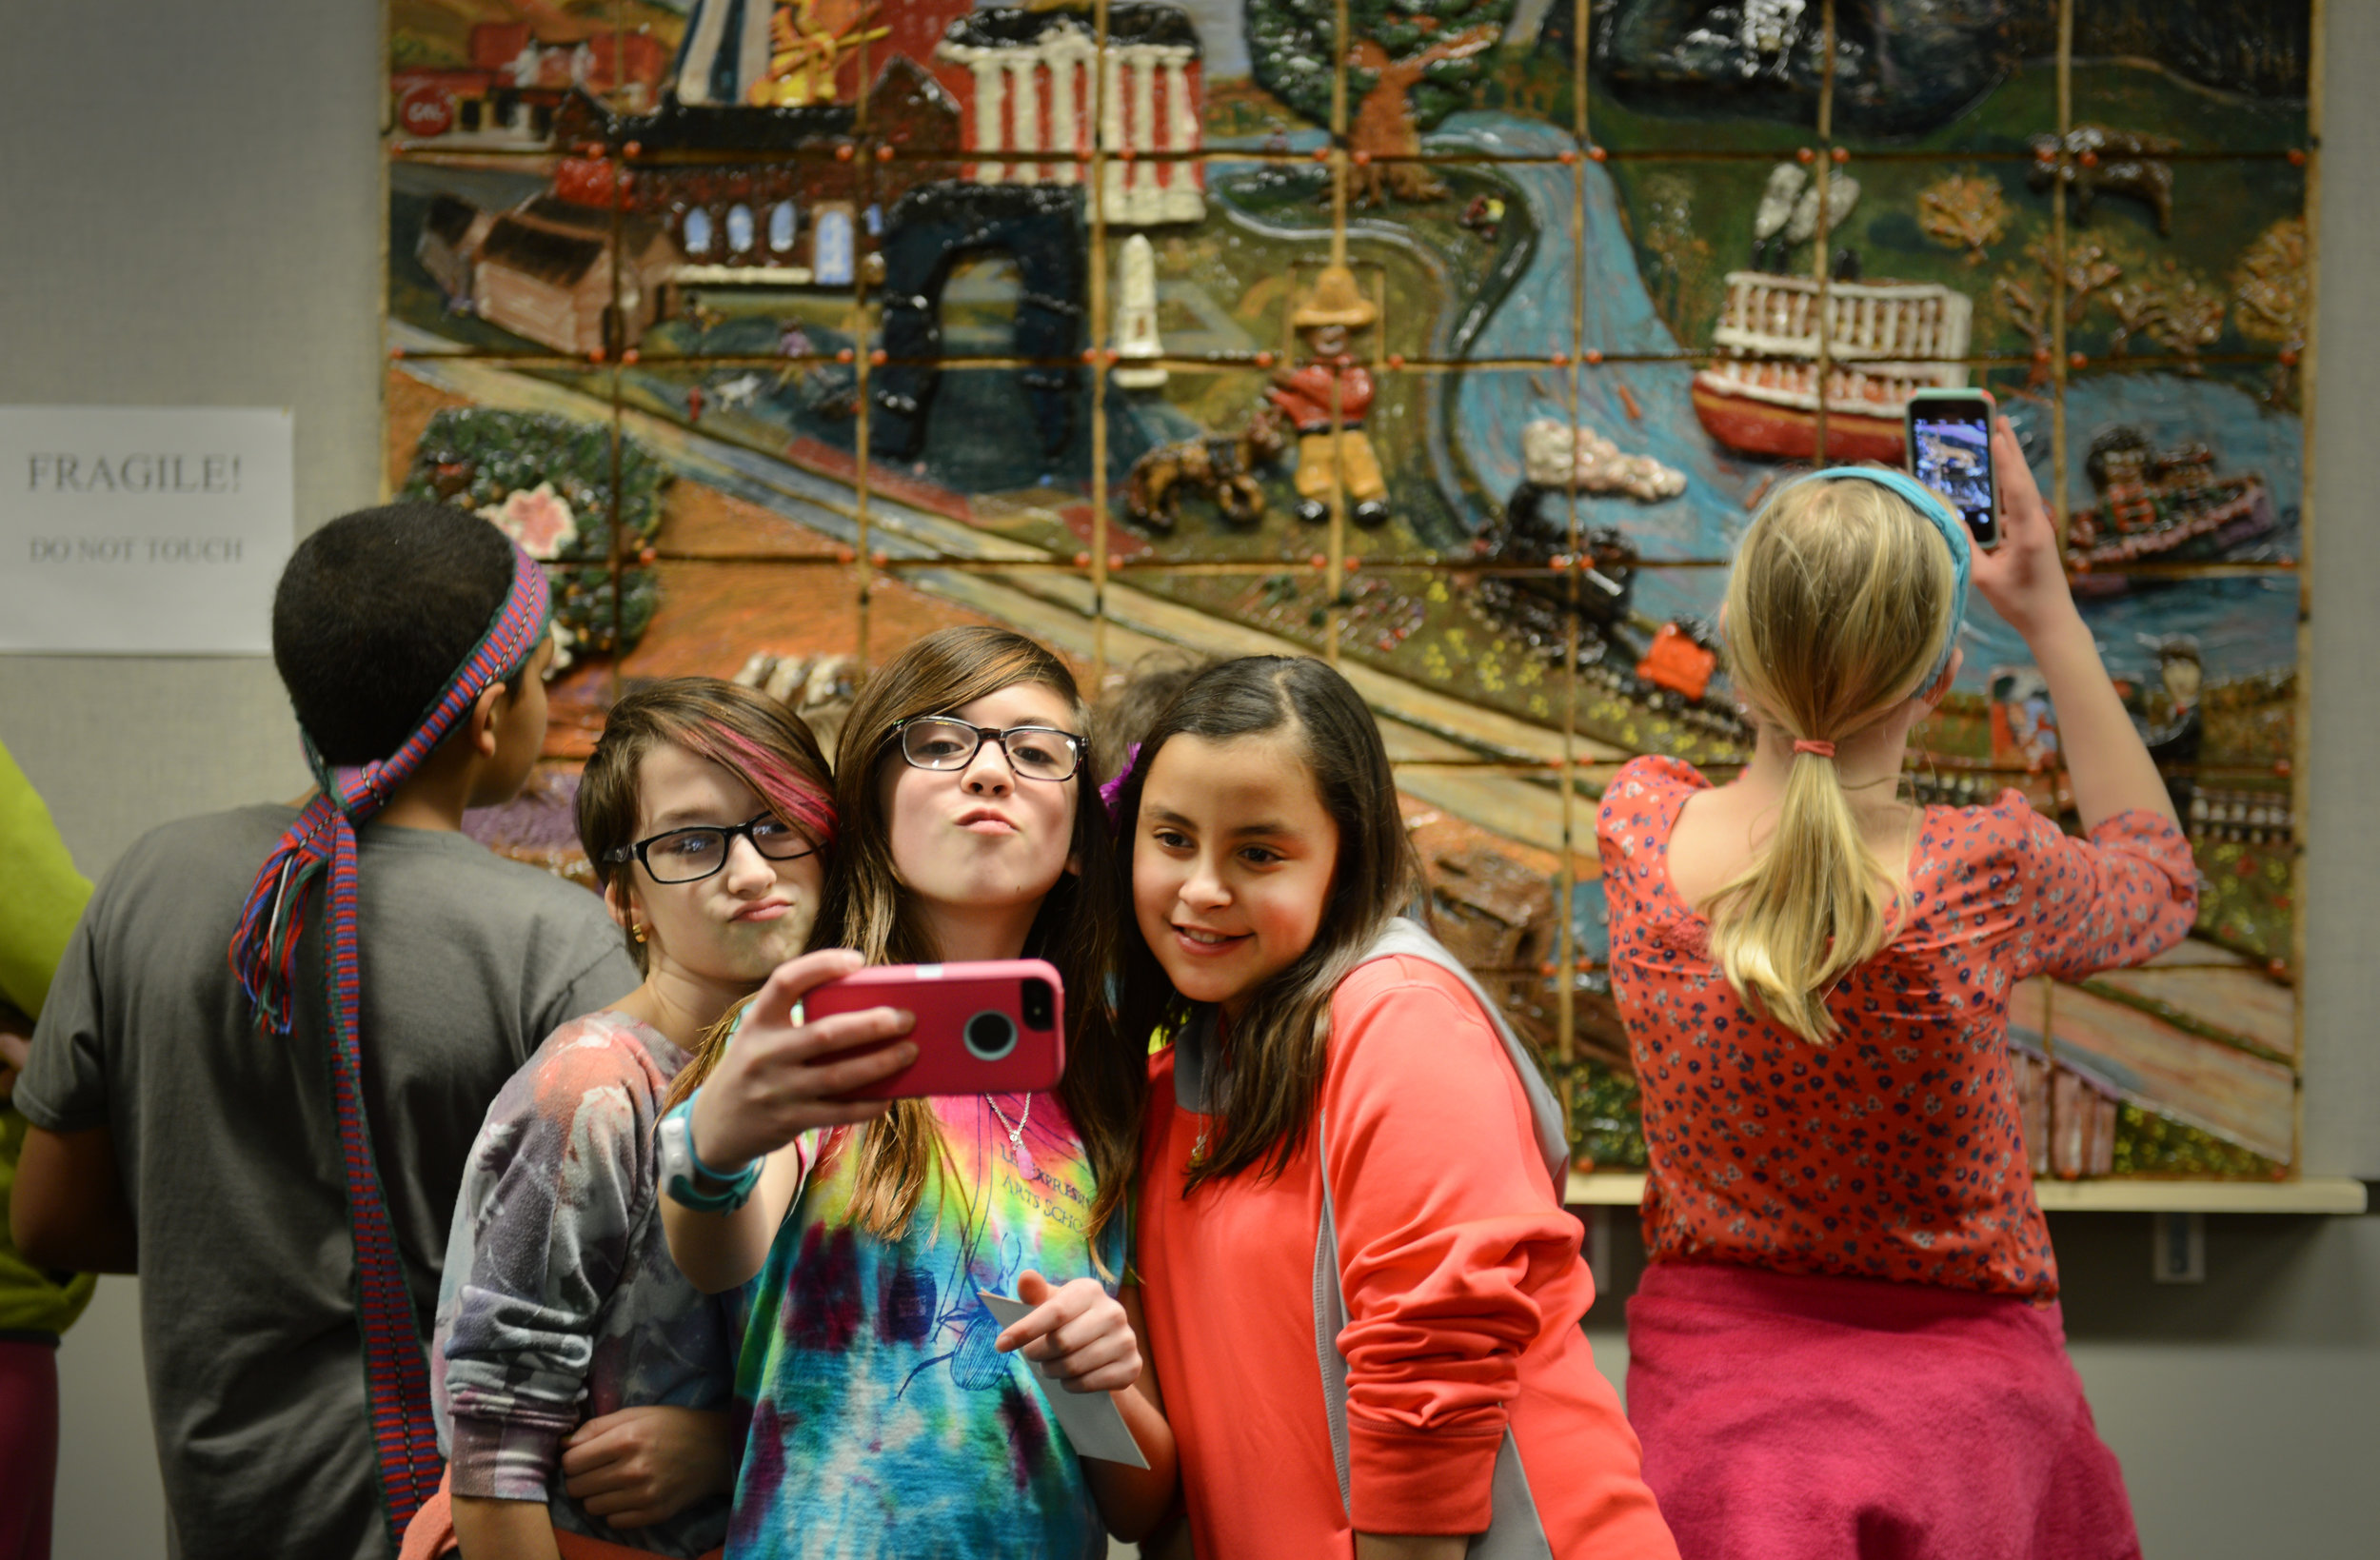  From left, Lee Expressive Arts Elementary students Devin Hall, 10, Ellie Bacon, 11, and Keya Beamer, 10, take a selfie in front of the mural they helped create on Tuesday, March 3, 2015, in Columbia, MO. The fifth grade class at the elementary schoo